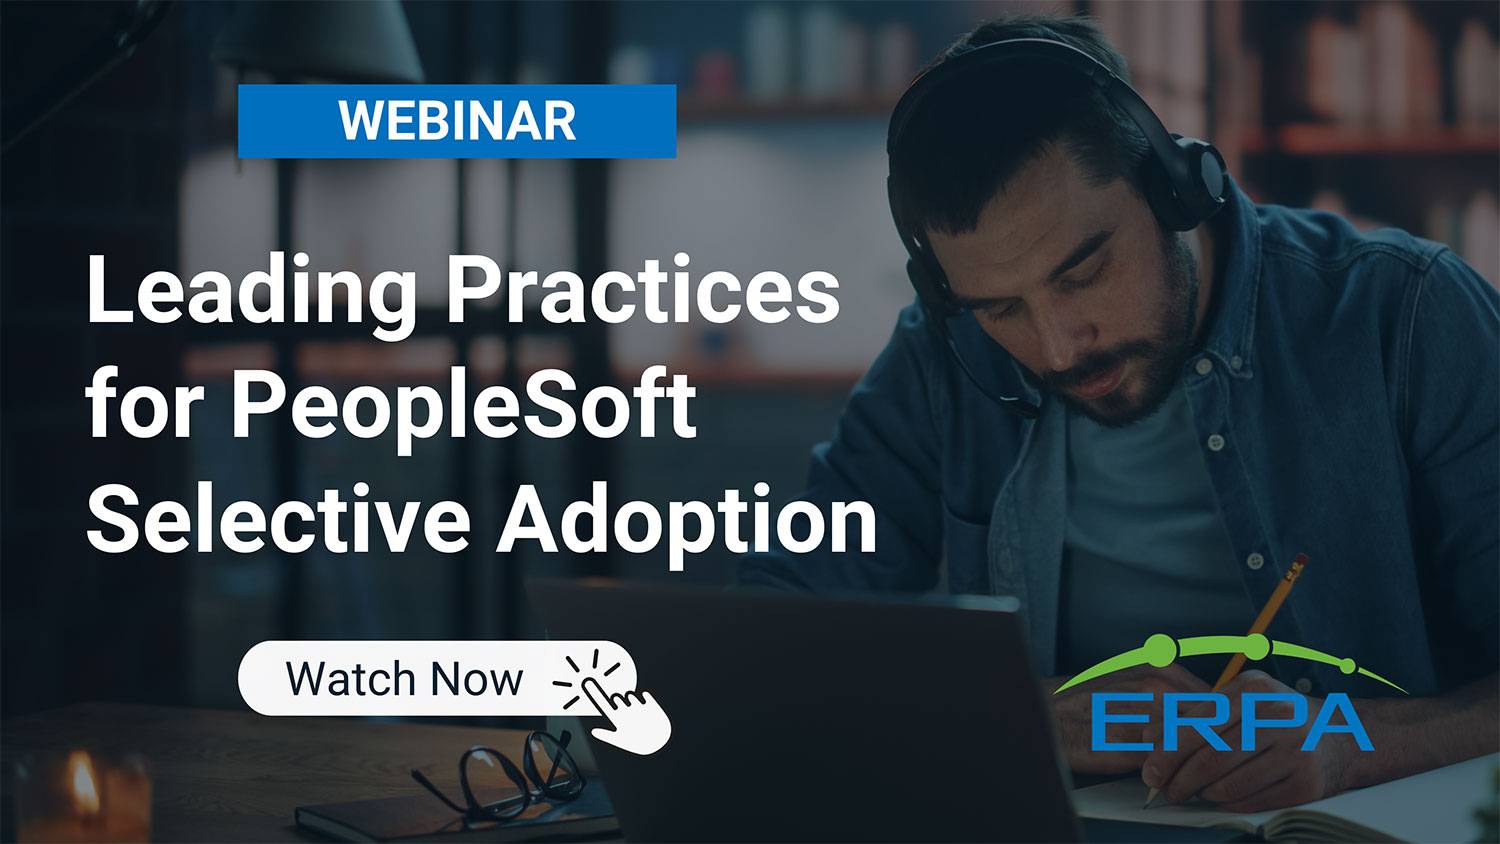 ERPA Webinar: Leading Practices for PeopleSoft Selective Adoption